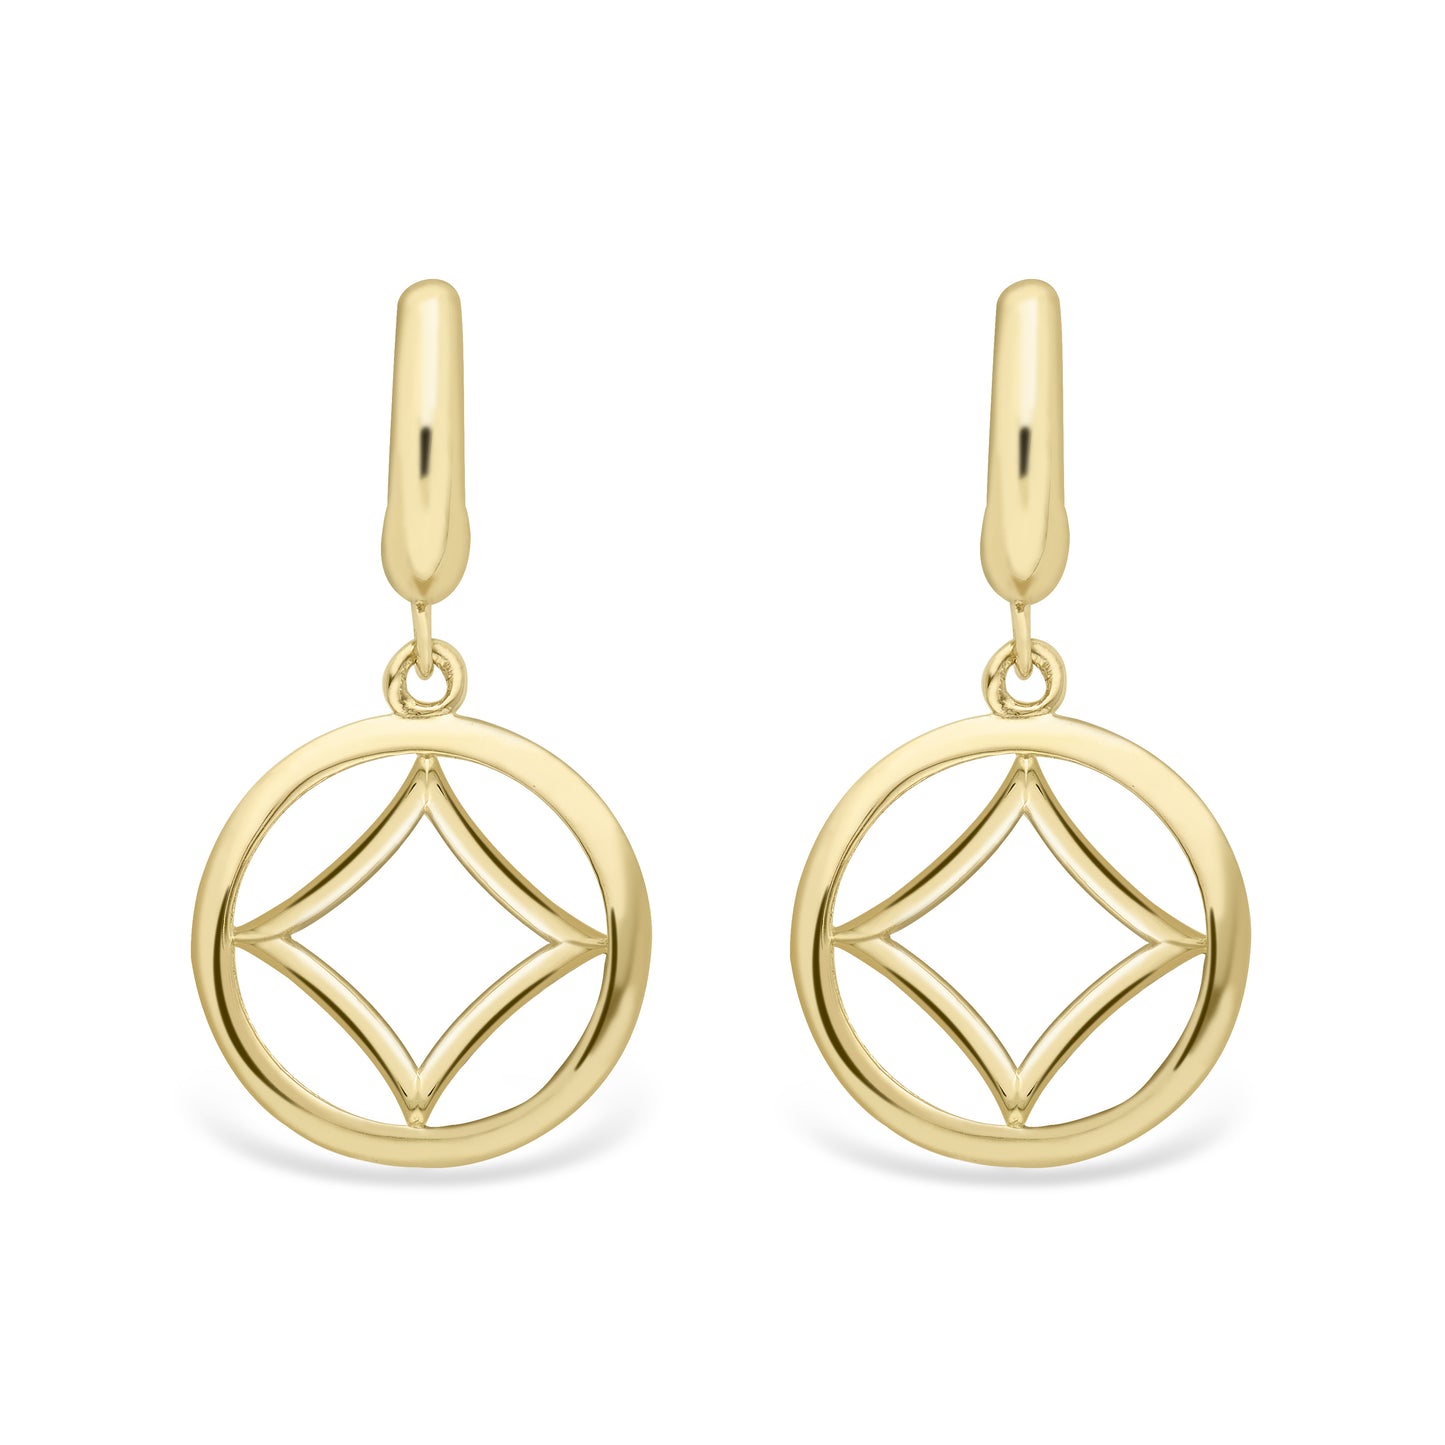 9ct Gold  Concaved Square Circle Drop Earrings - ERNR02288